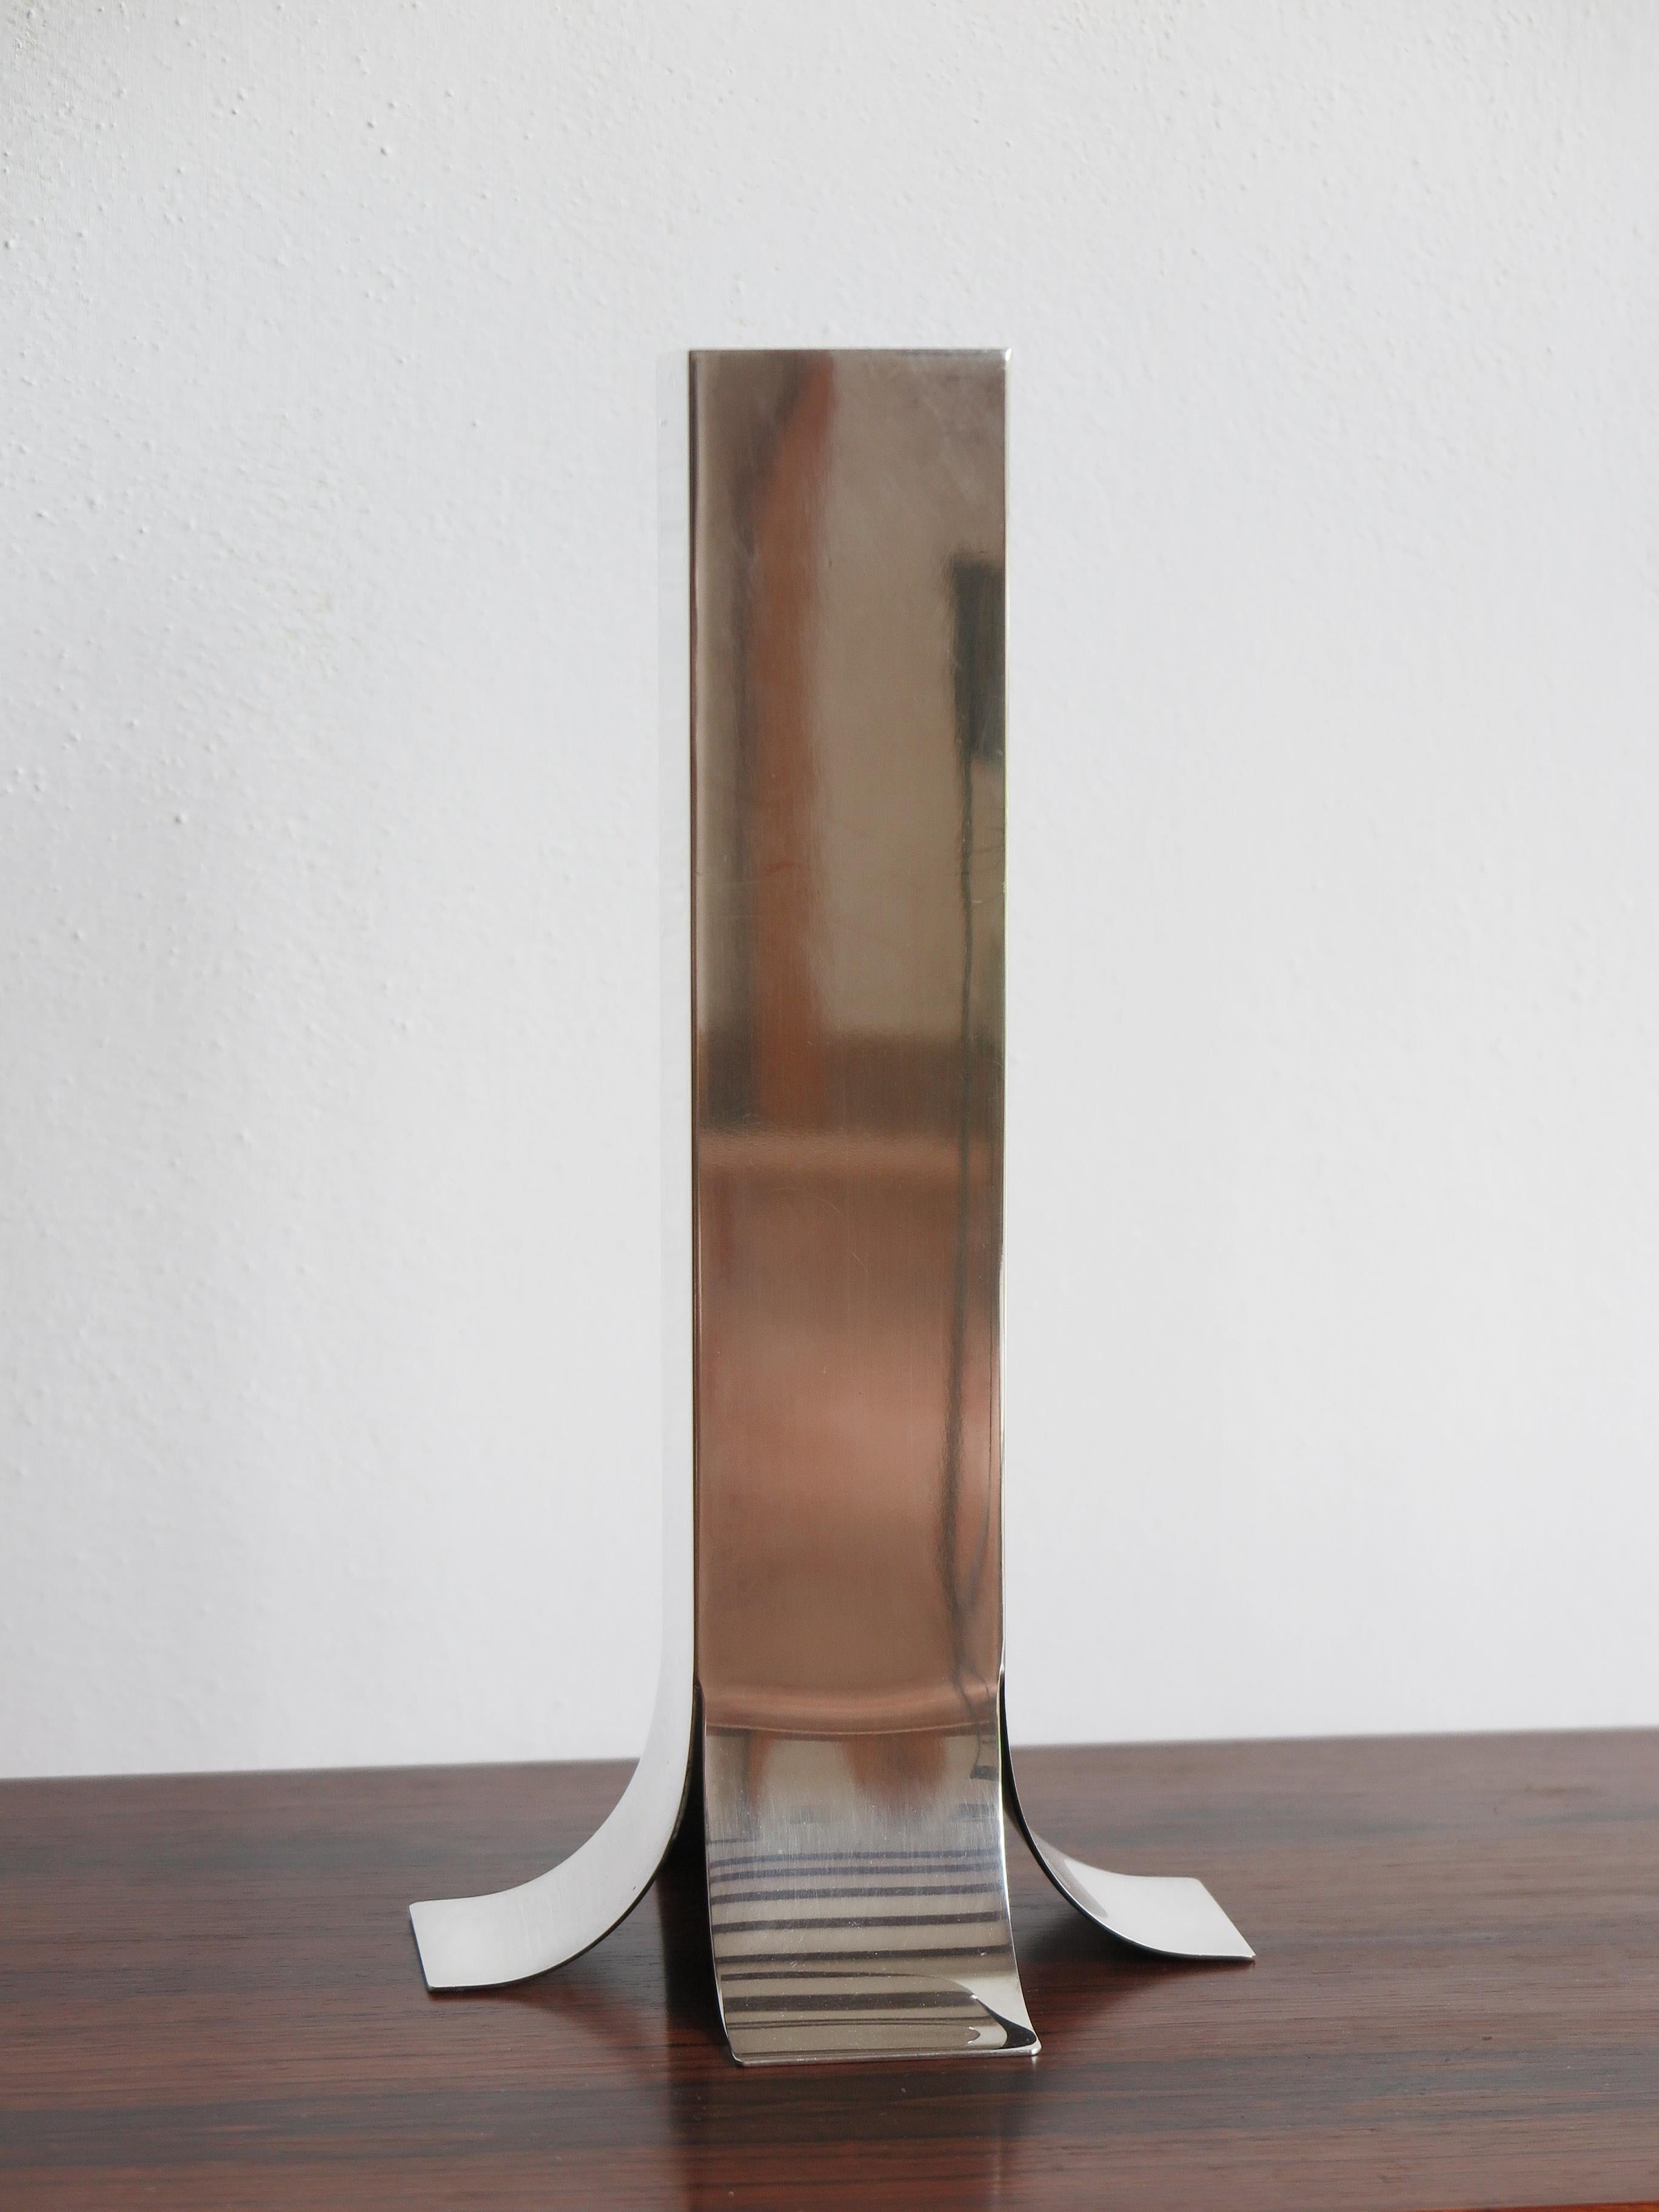 Italian Mid-Century Modern design silvered metal “Stele” vase o candle holder designed by Lino Sabattini and produced by Argenterie Sabattini from 1963 with trademark on the back Sabattini Made in Italy.

Bibliography:
Filippo Alison and Renato